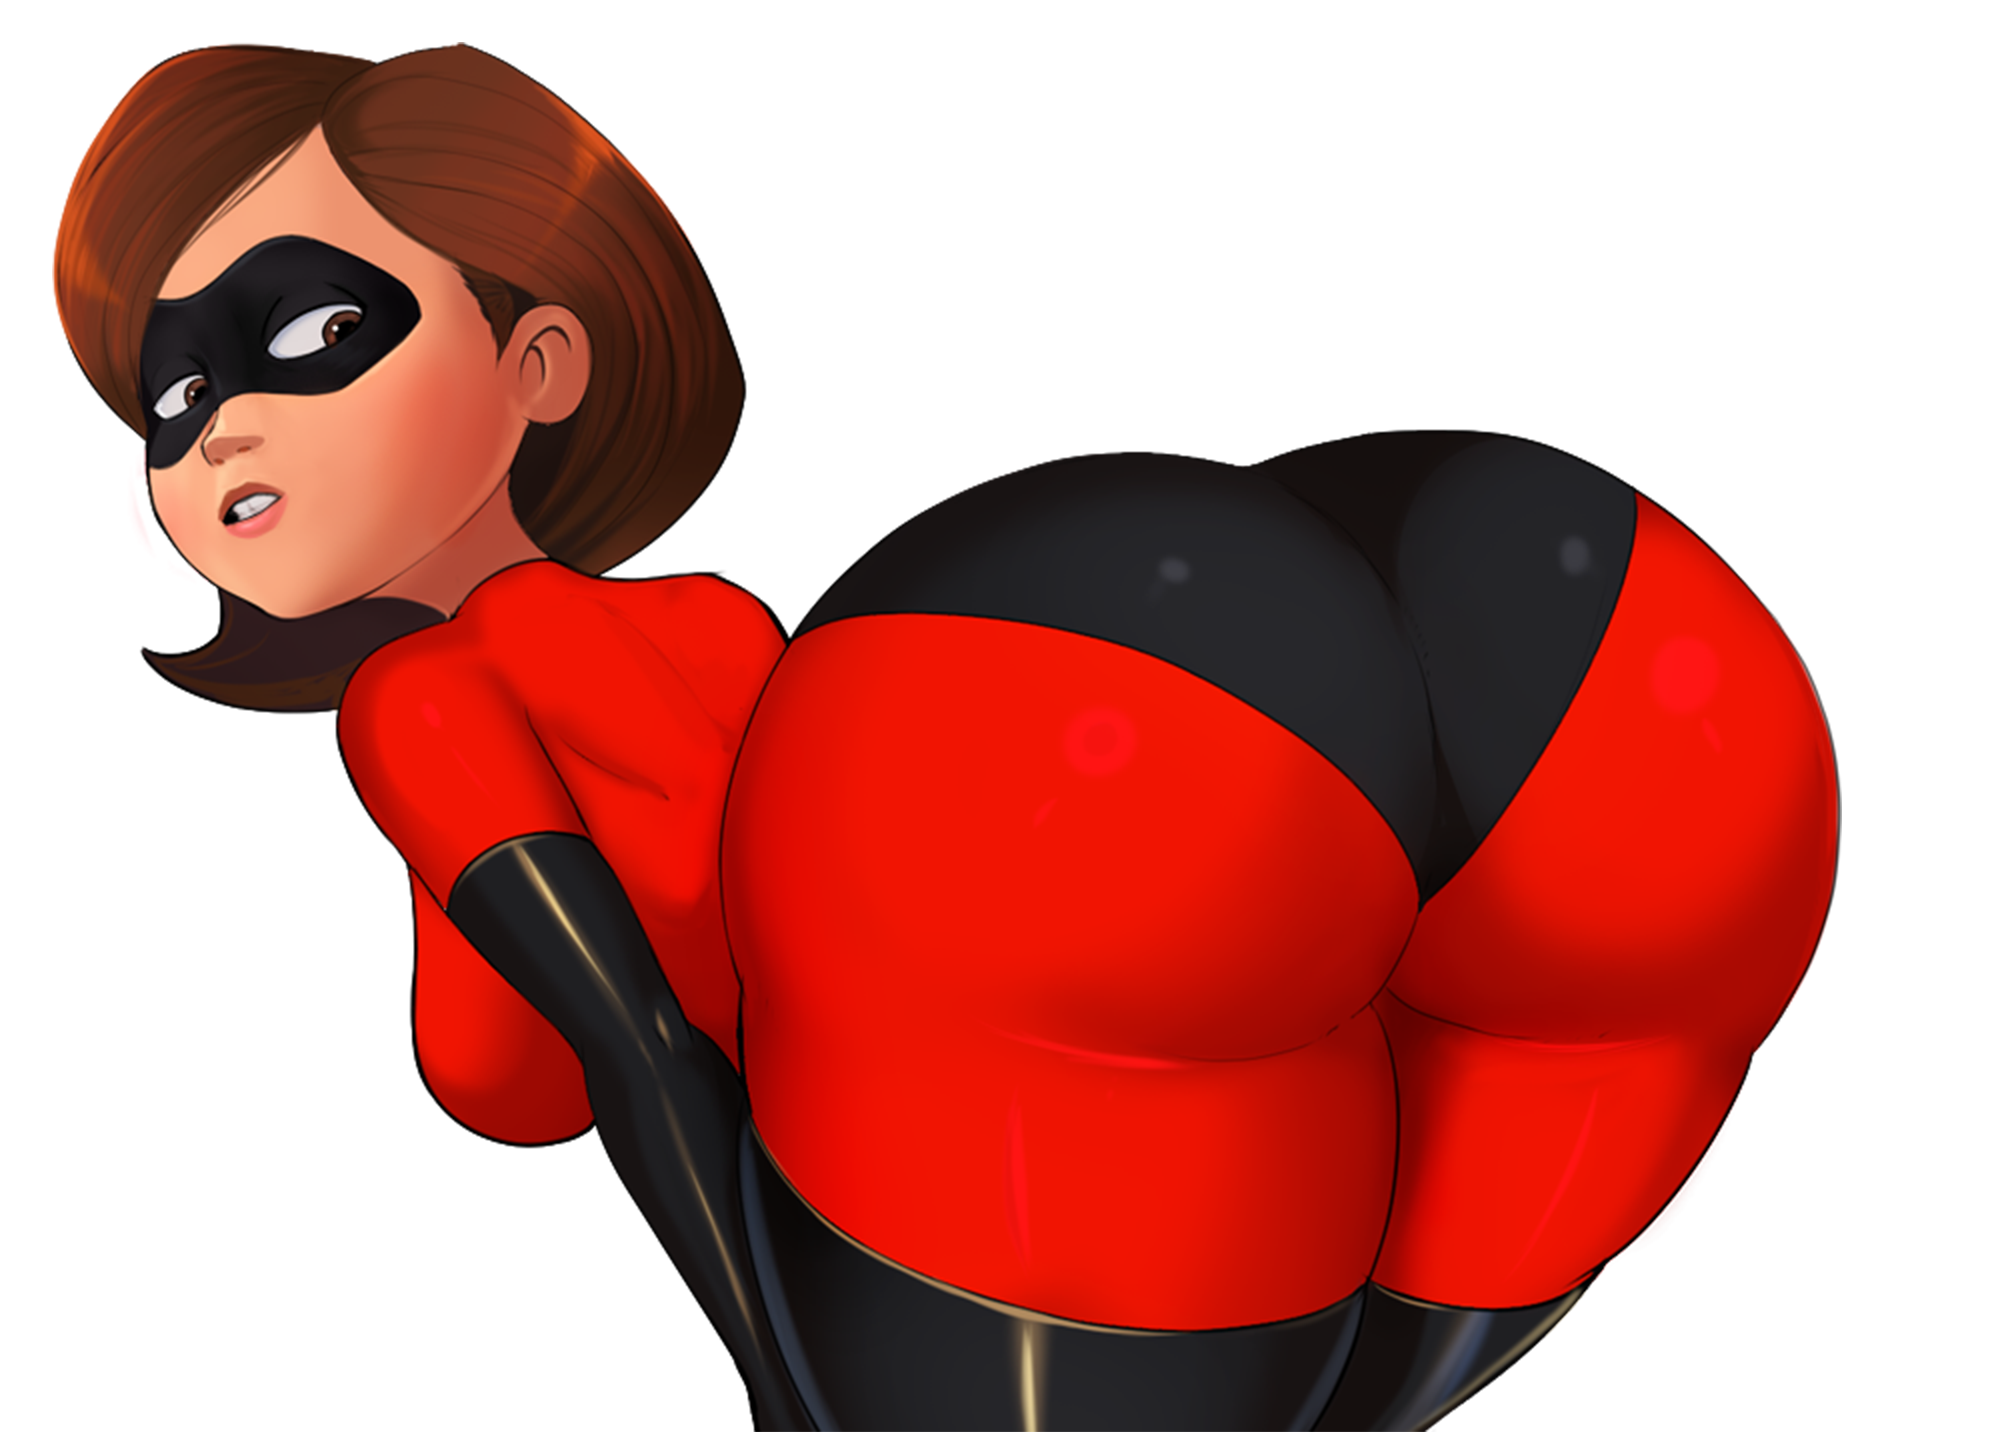 The incredibles butt